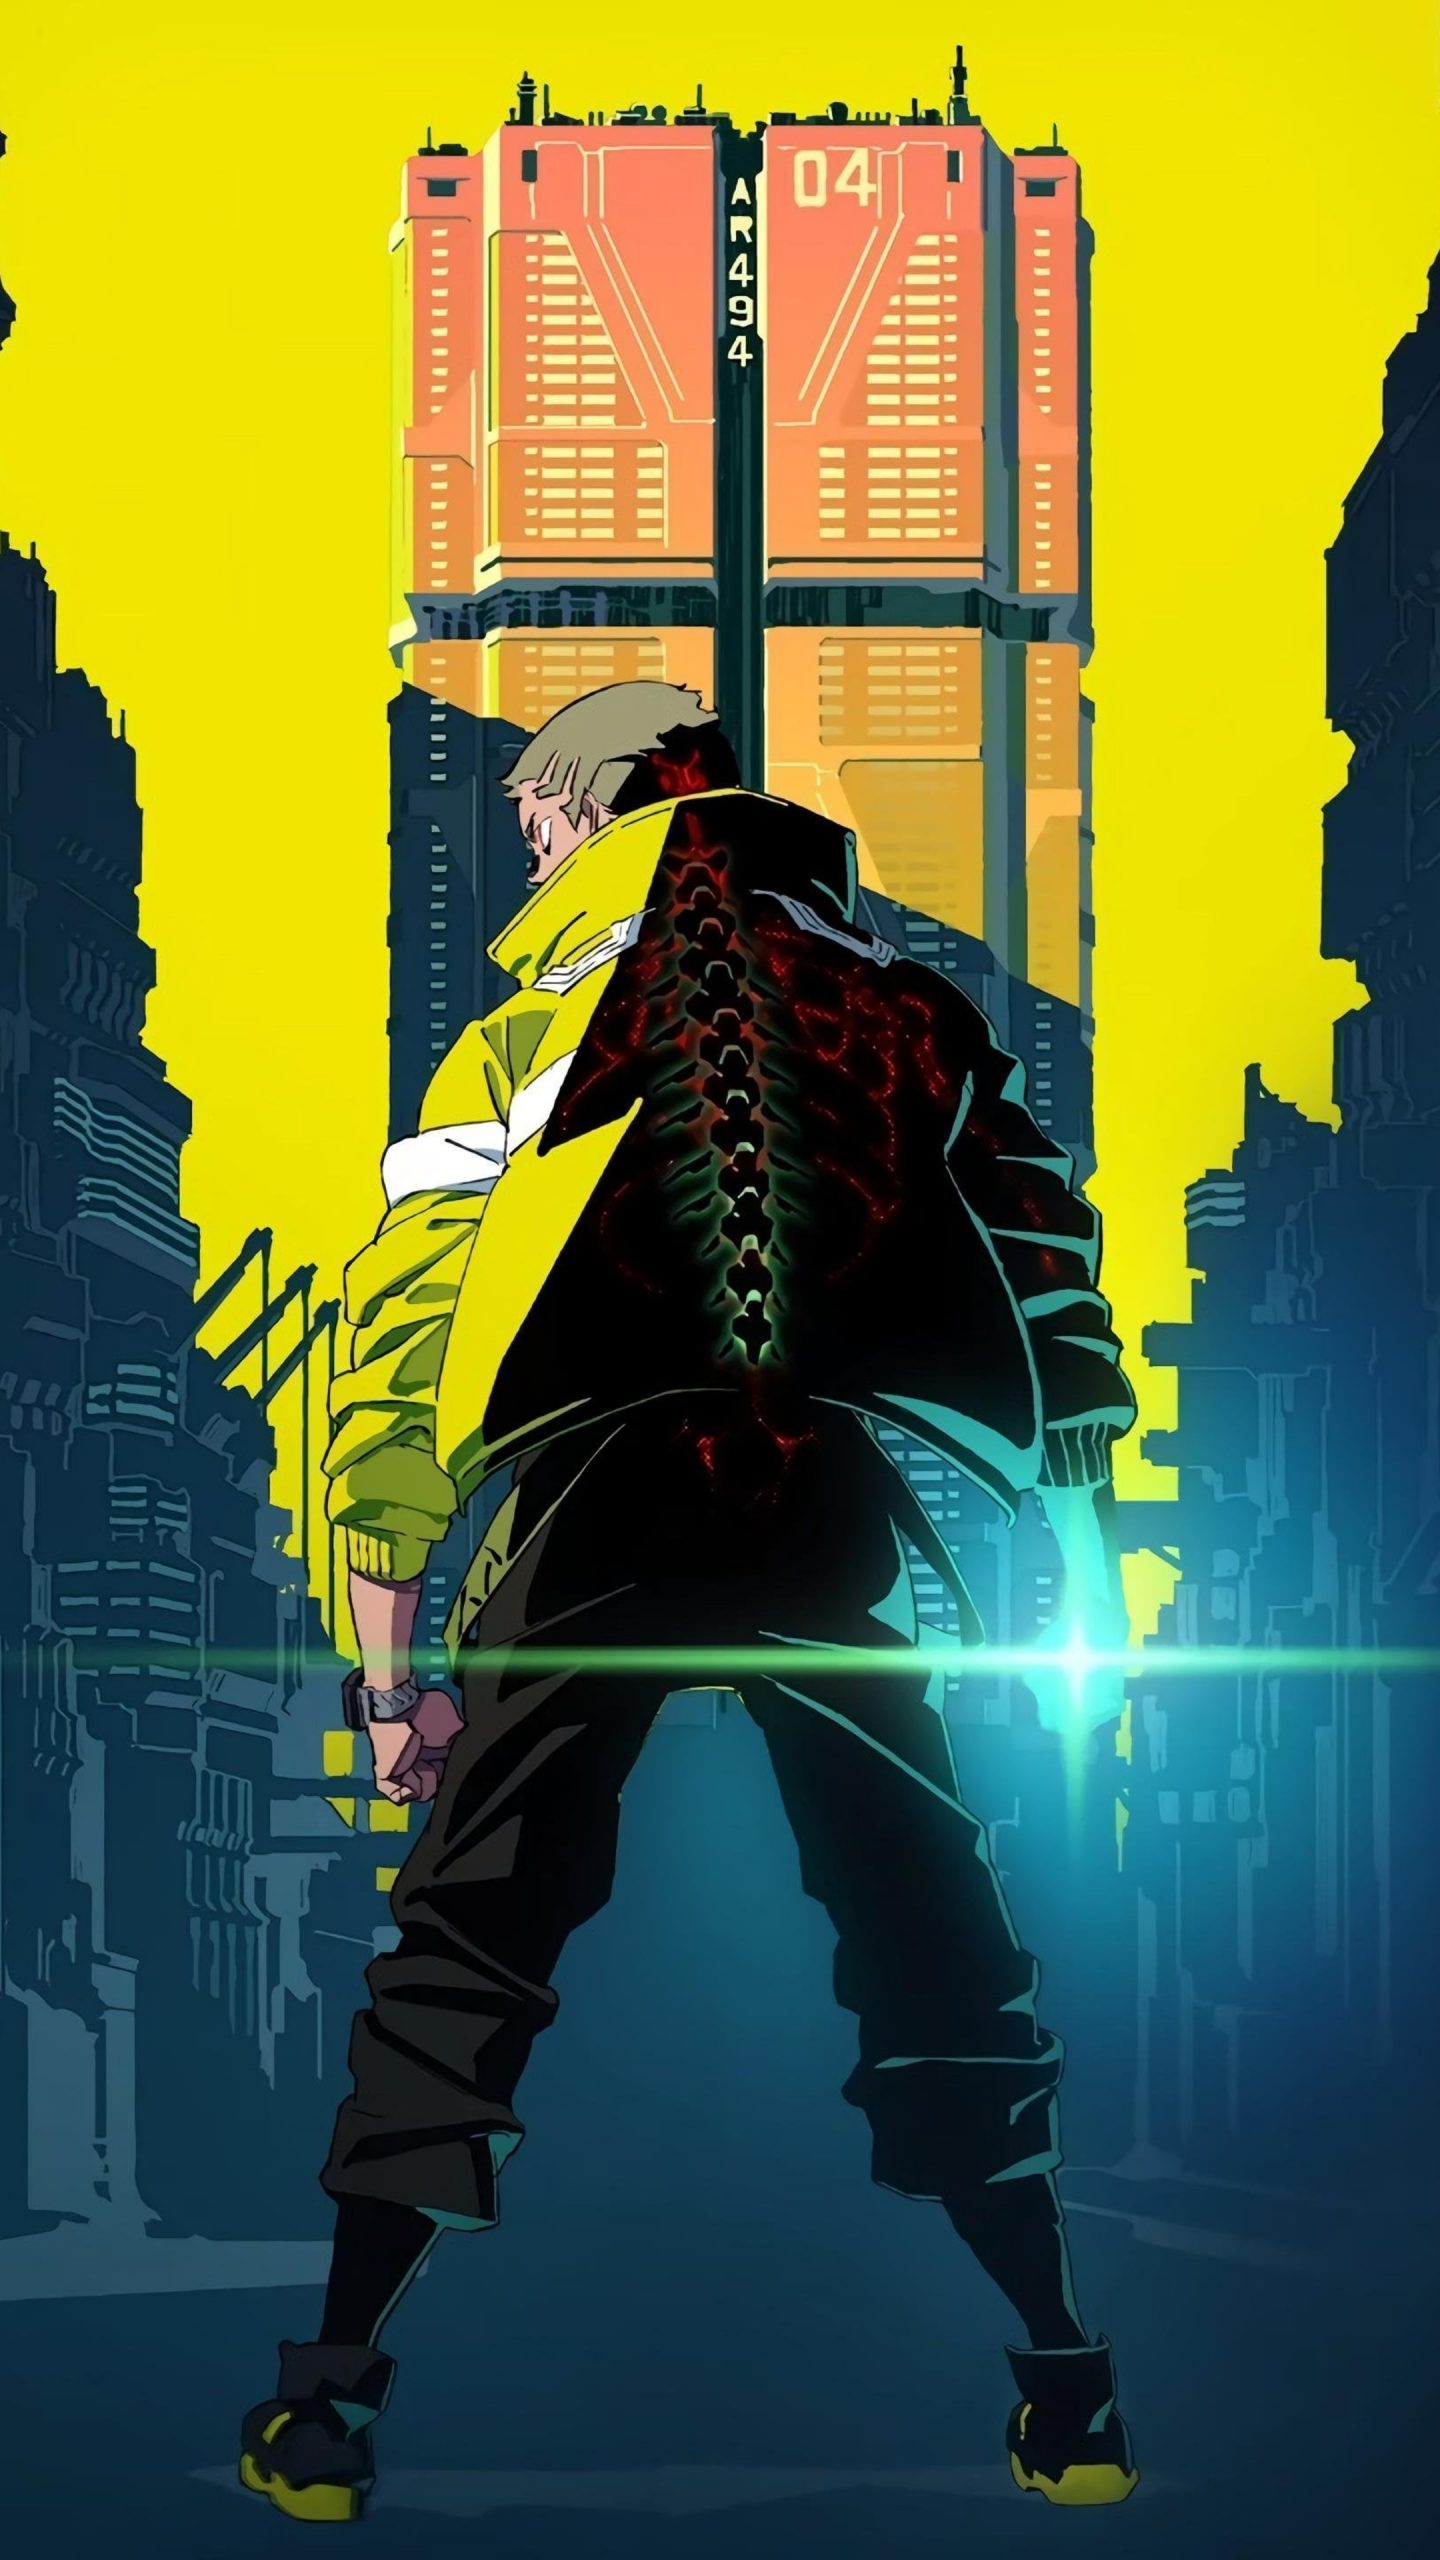 The anime's Cyberpunk: Edgerunners trailer confirms the premiere date of September 13